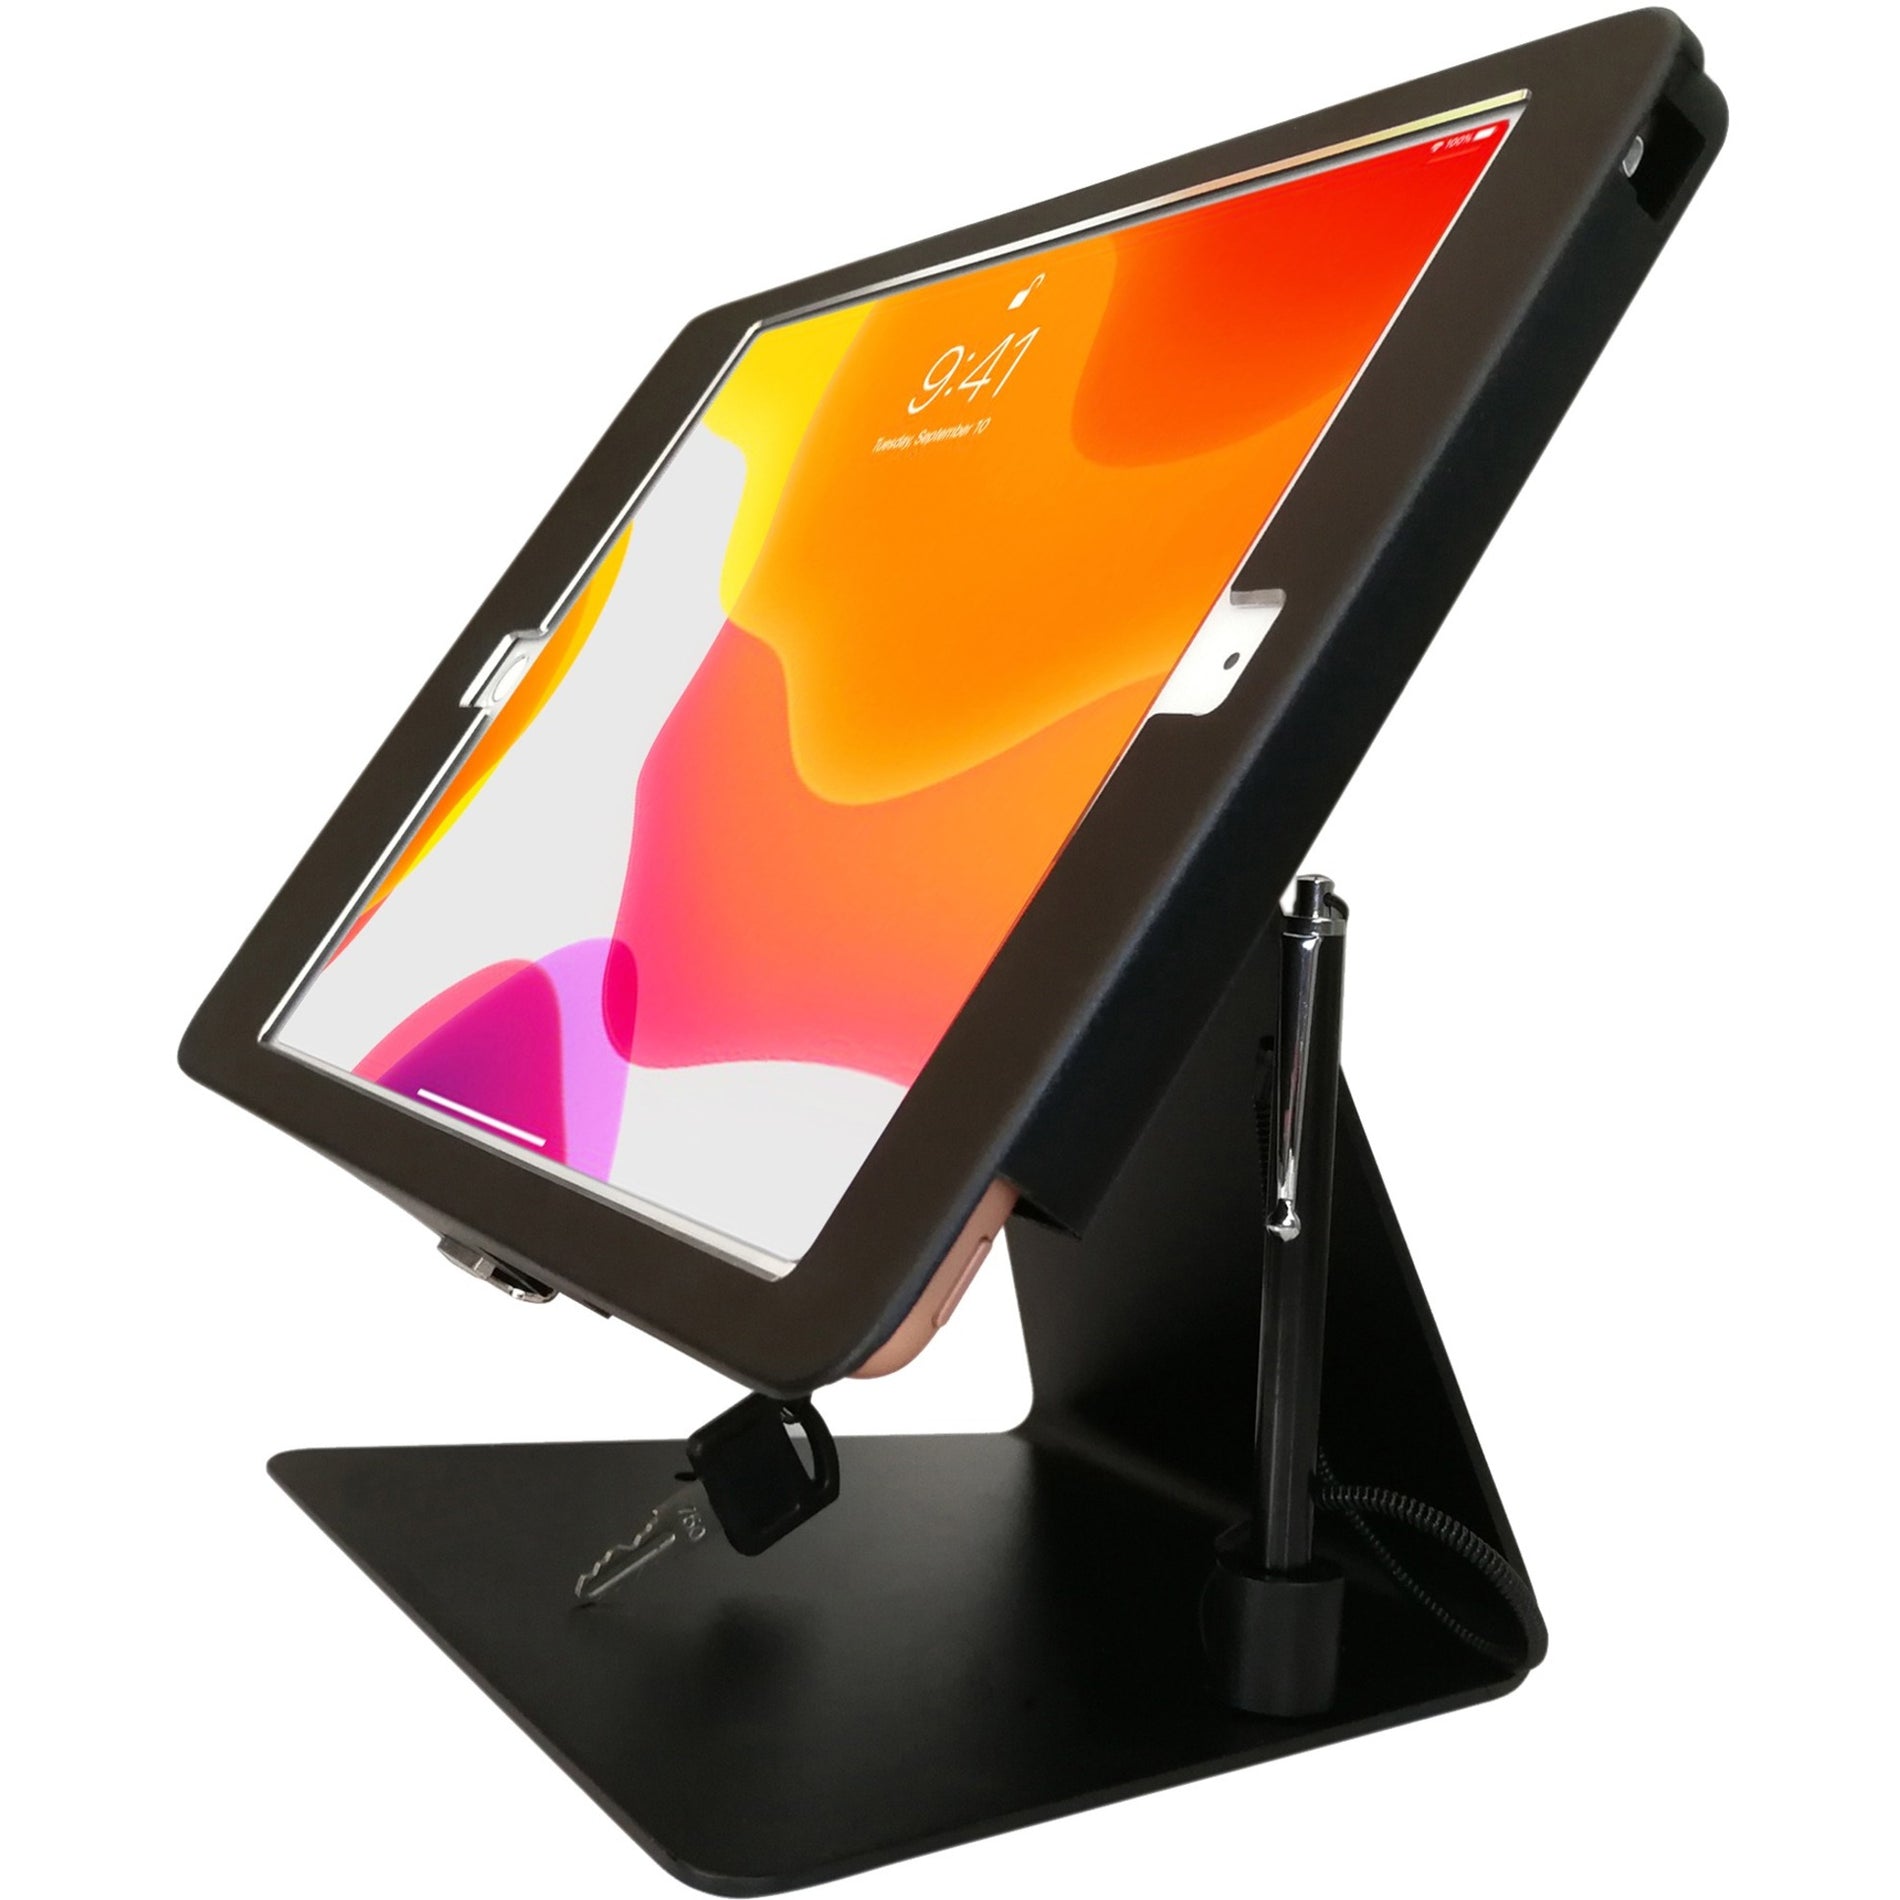 CTA Digital PAD-DASB10 Kiosk Stand, Up to 10.2" Screen Support